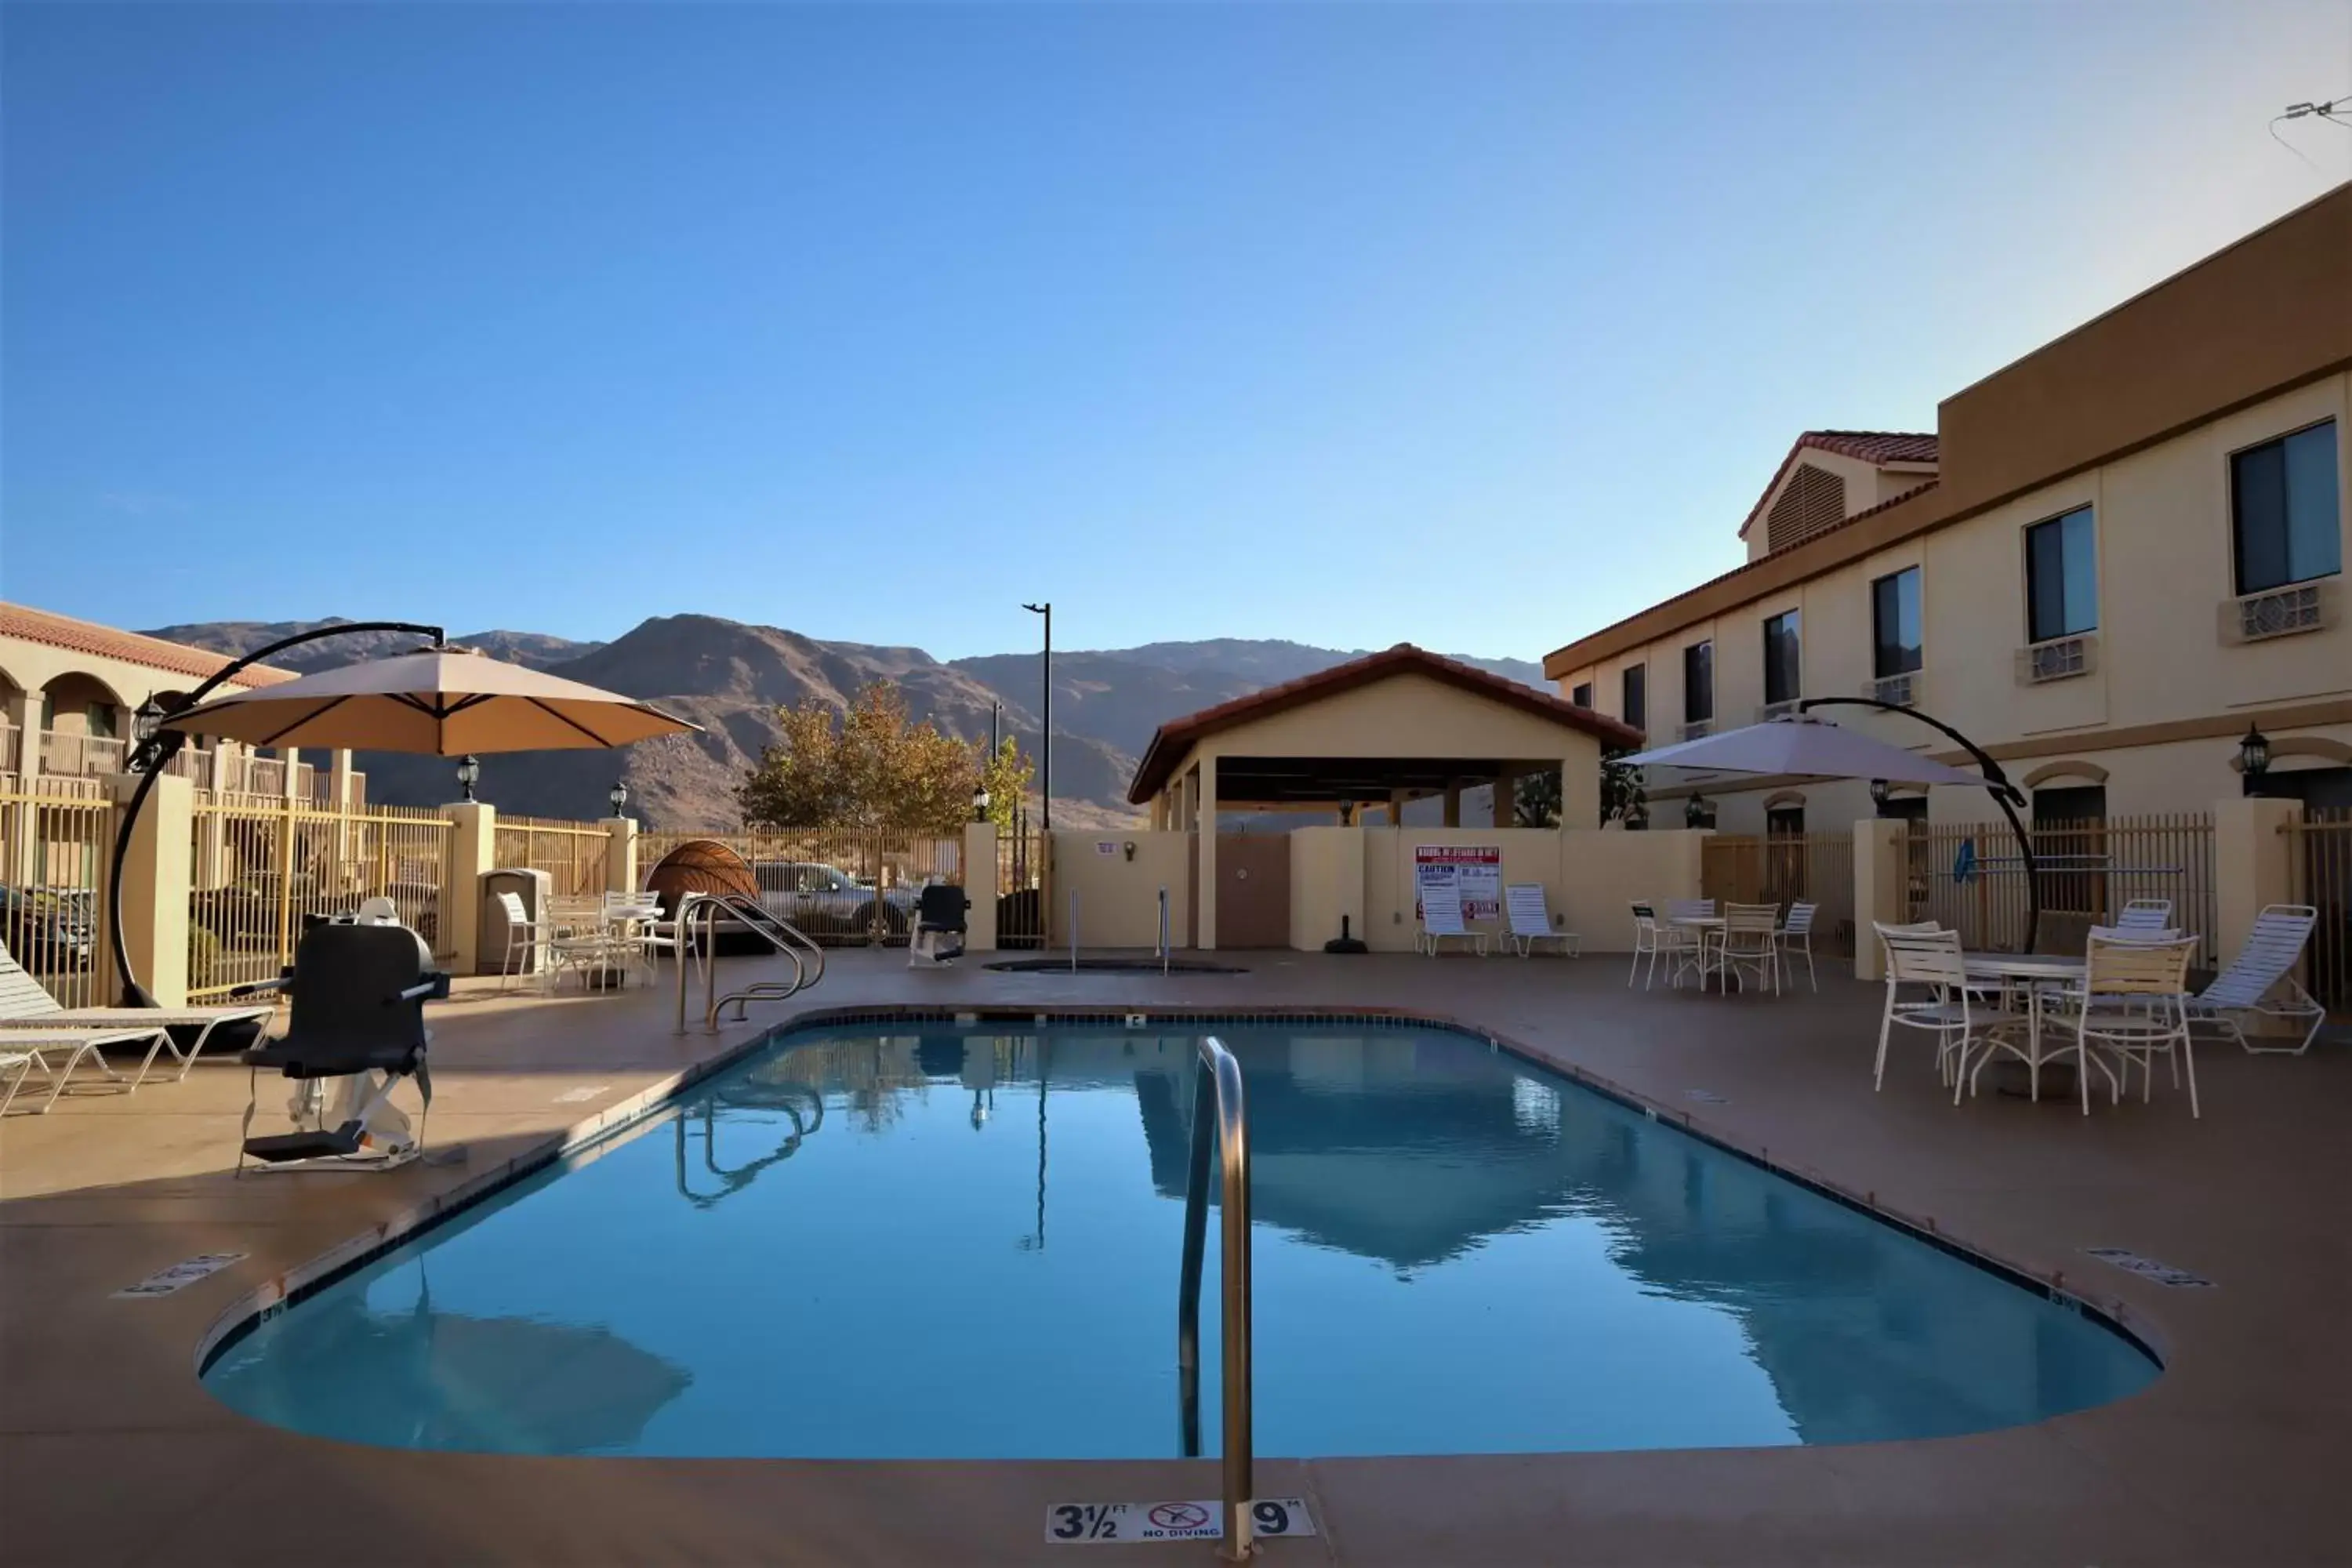 Property building, Swimming Pool in Oasis Inn and Suites Joshua Tree -29 Palms